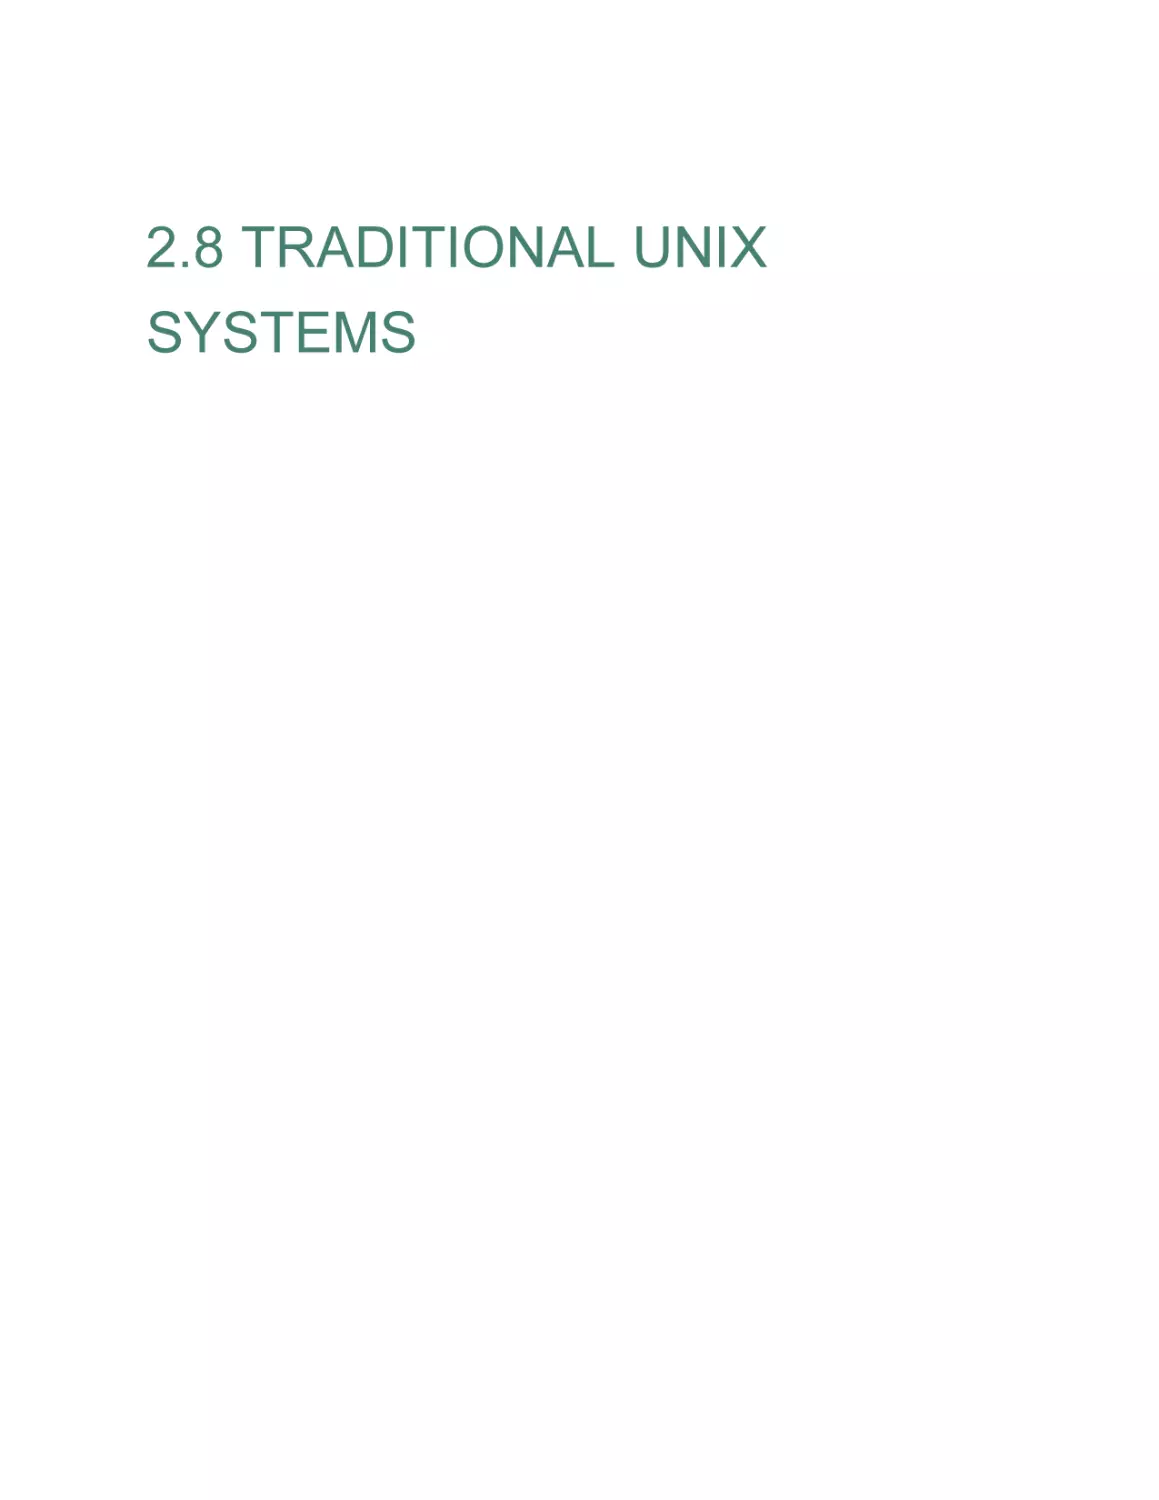 2.8 TRADITIONAL UNIX SYSTEMS